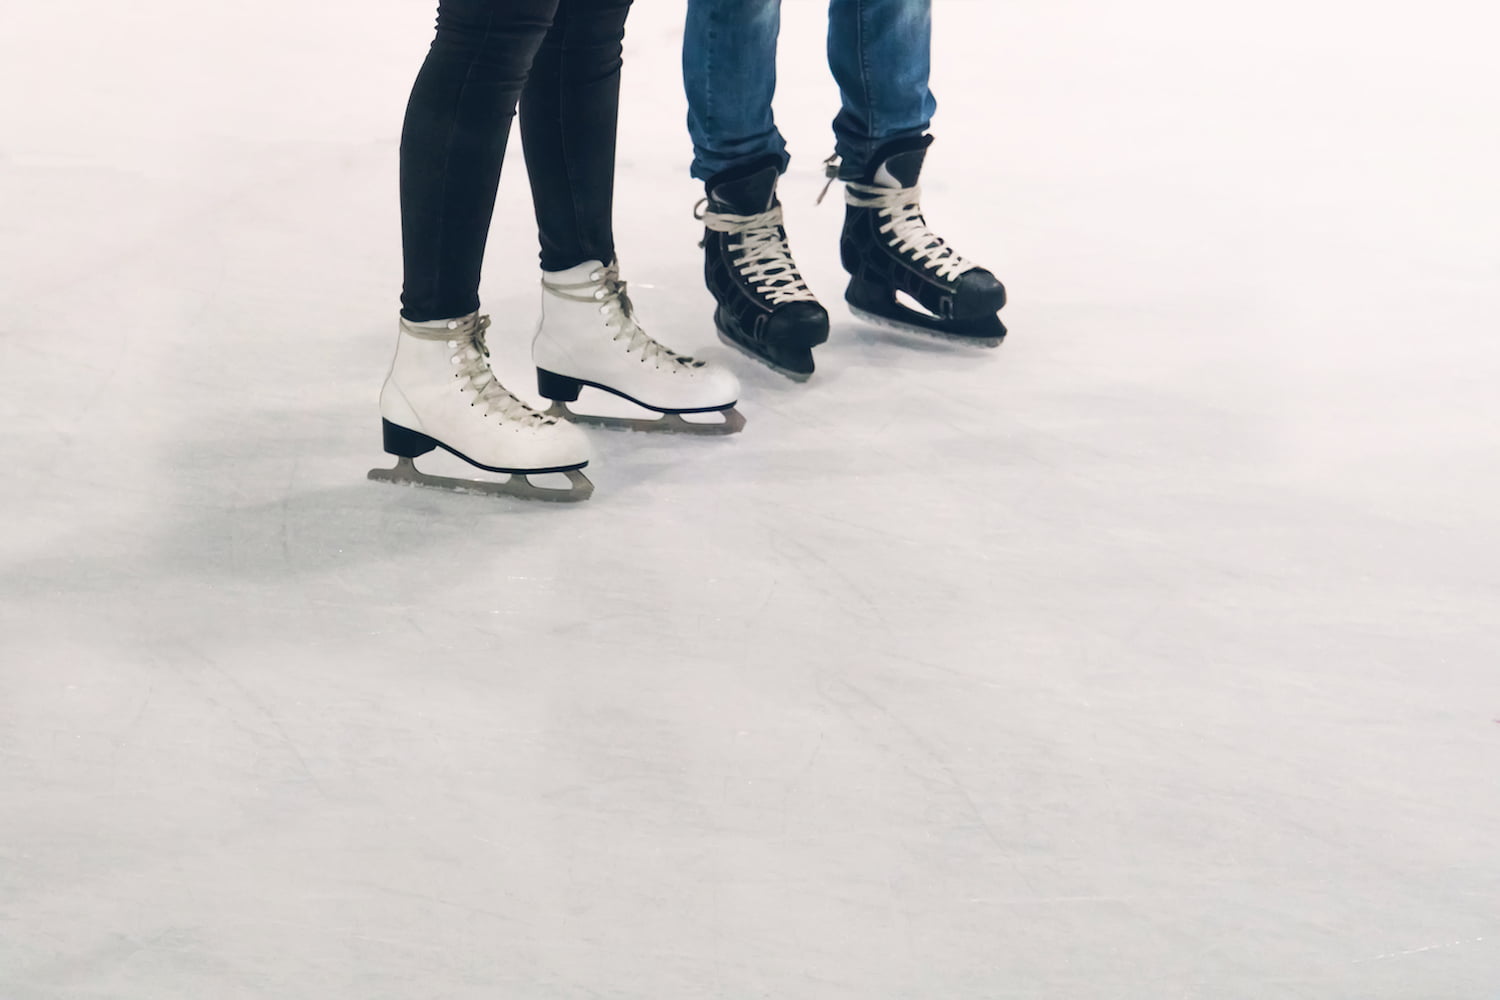 The Best Places to Go Ice Skating in the Poconos